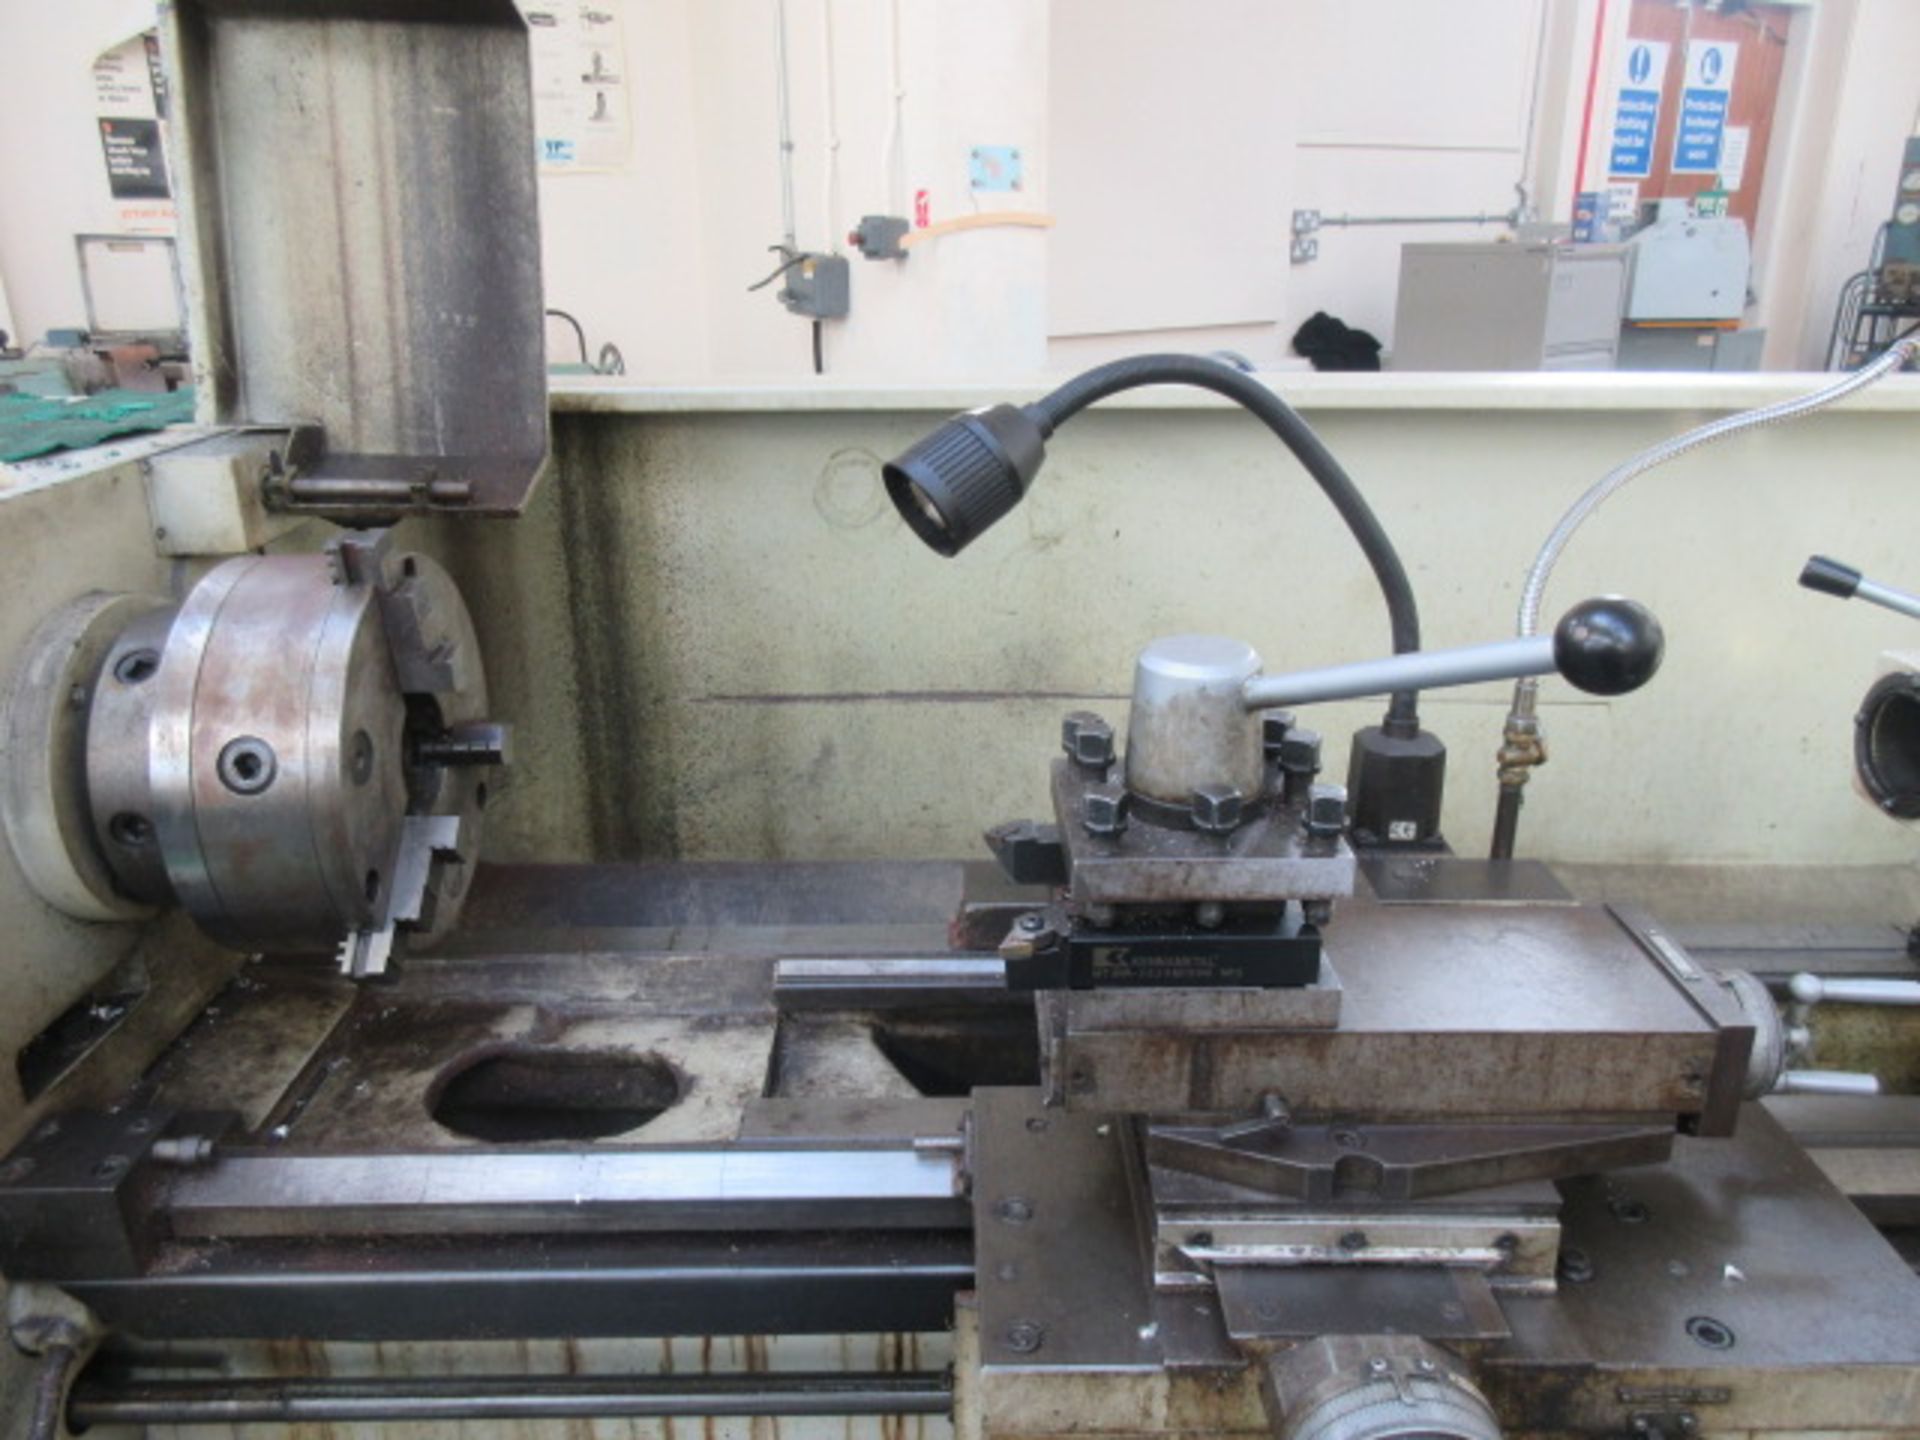 Excel XL1640 440mm dia x 1000mm gap bed lathe with 3 jaw chuck, tailstock & metric/Imperial dials. - Image 2 of 3